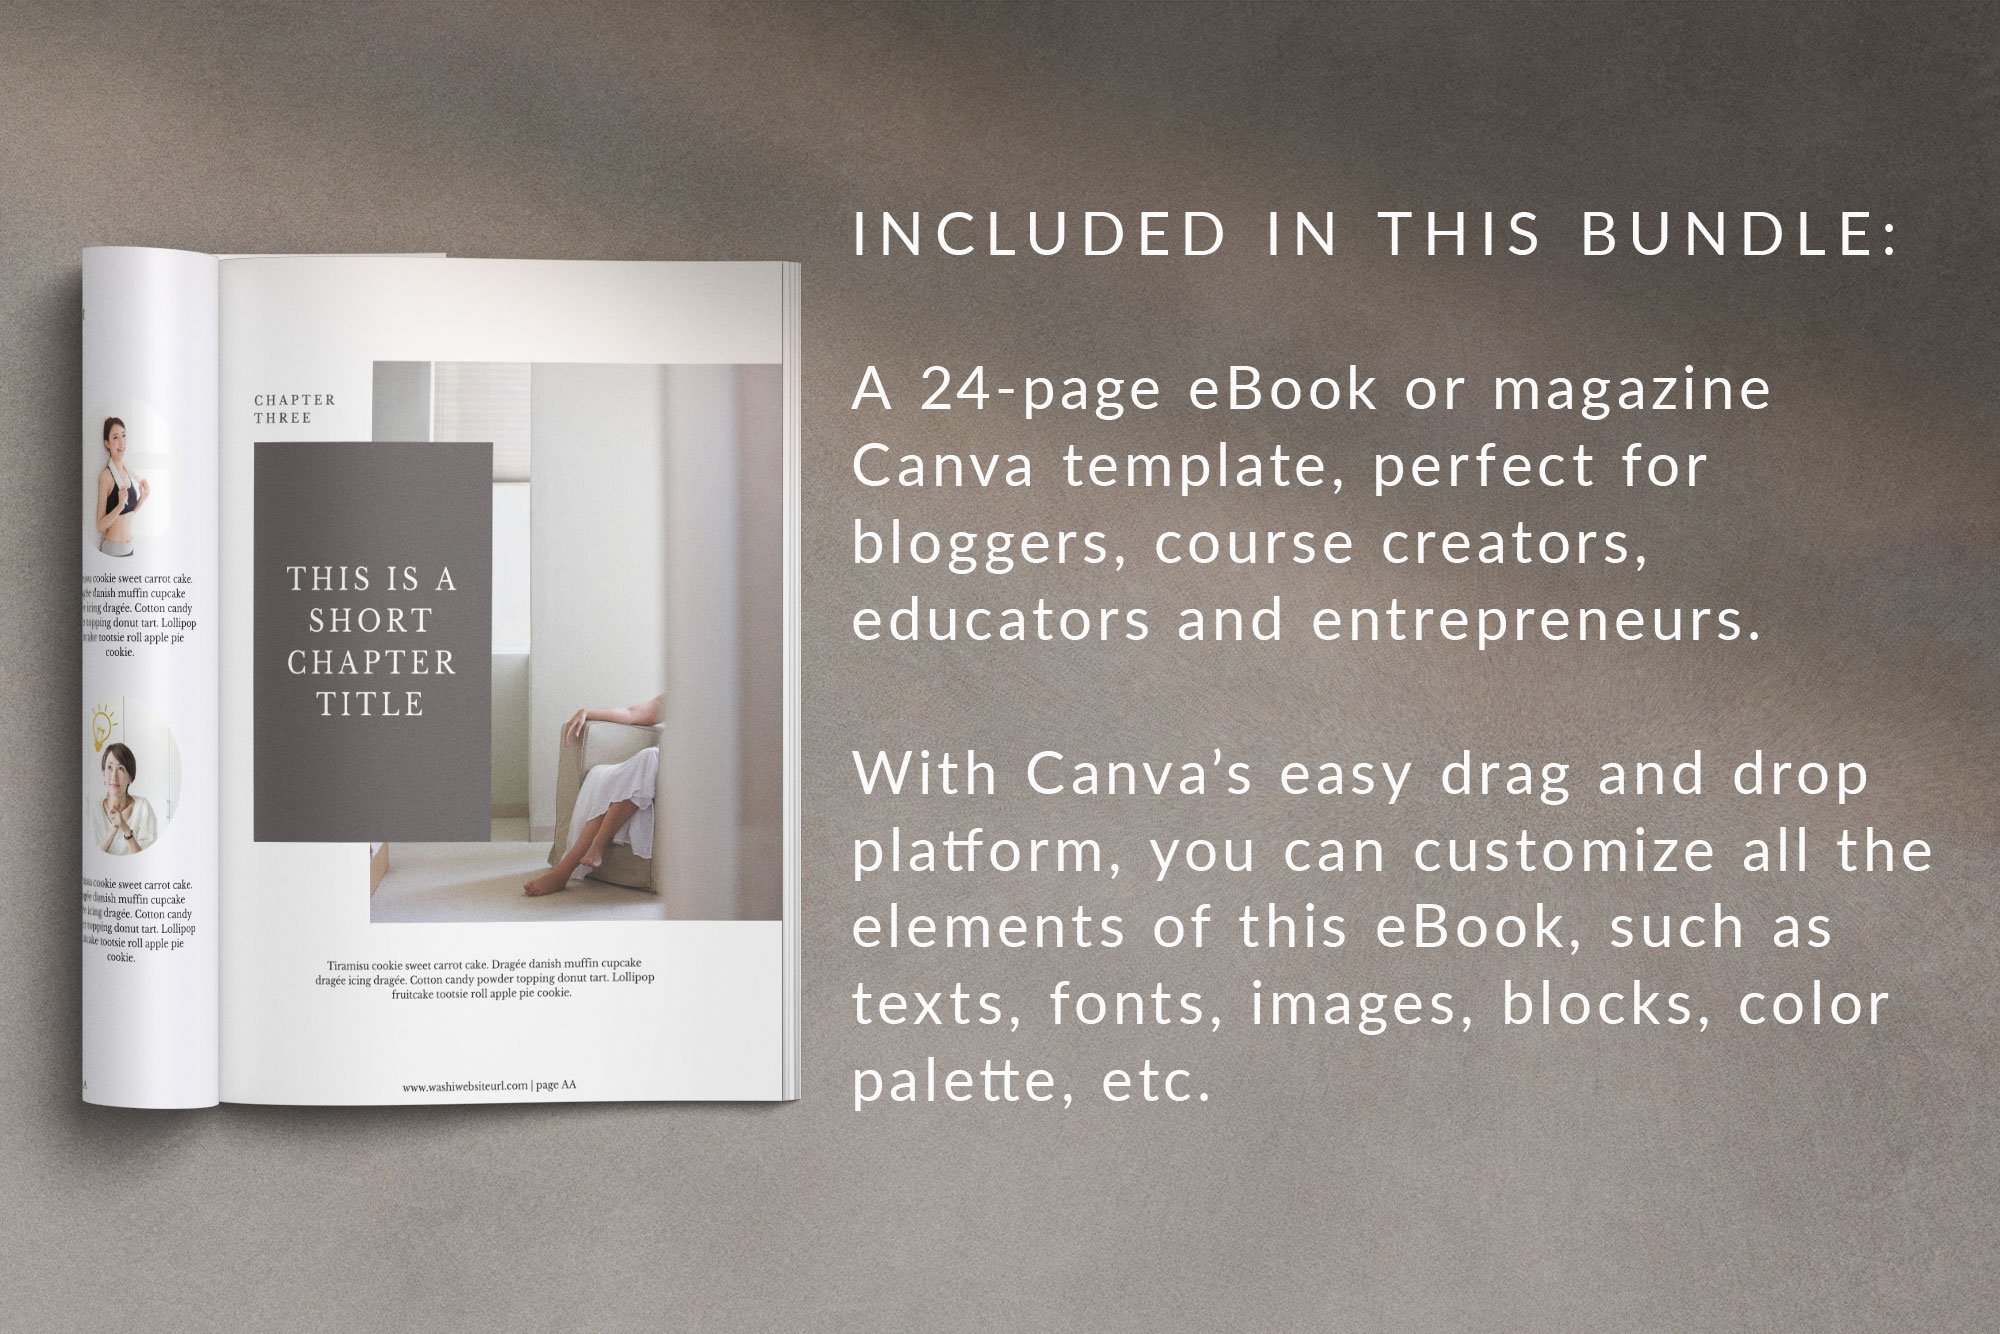 eBook/Magazine Canva Template- Washi preview image.